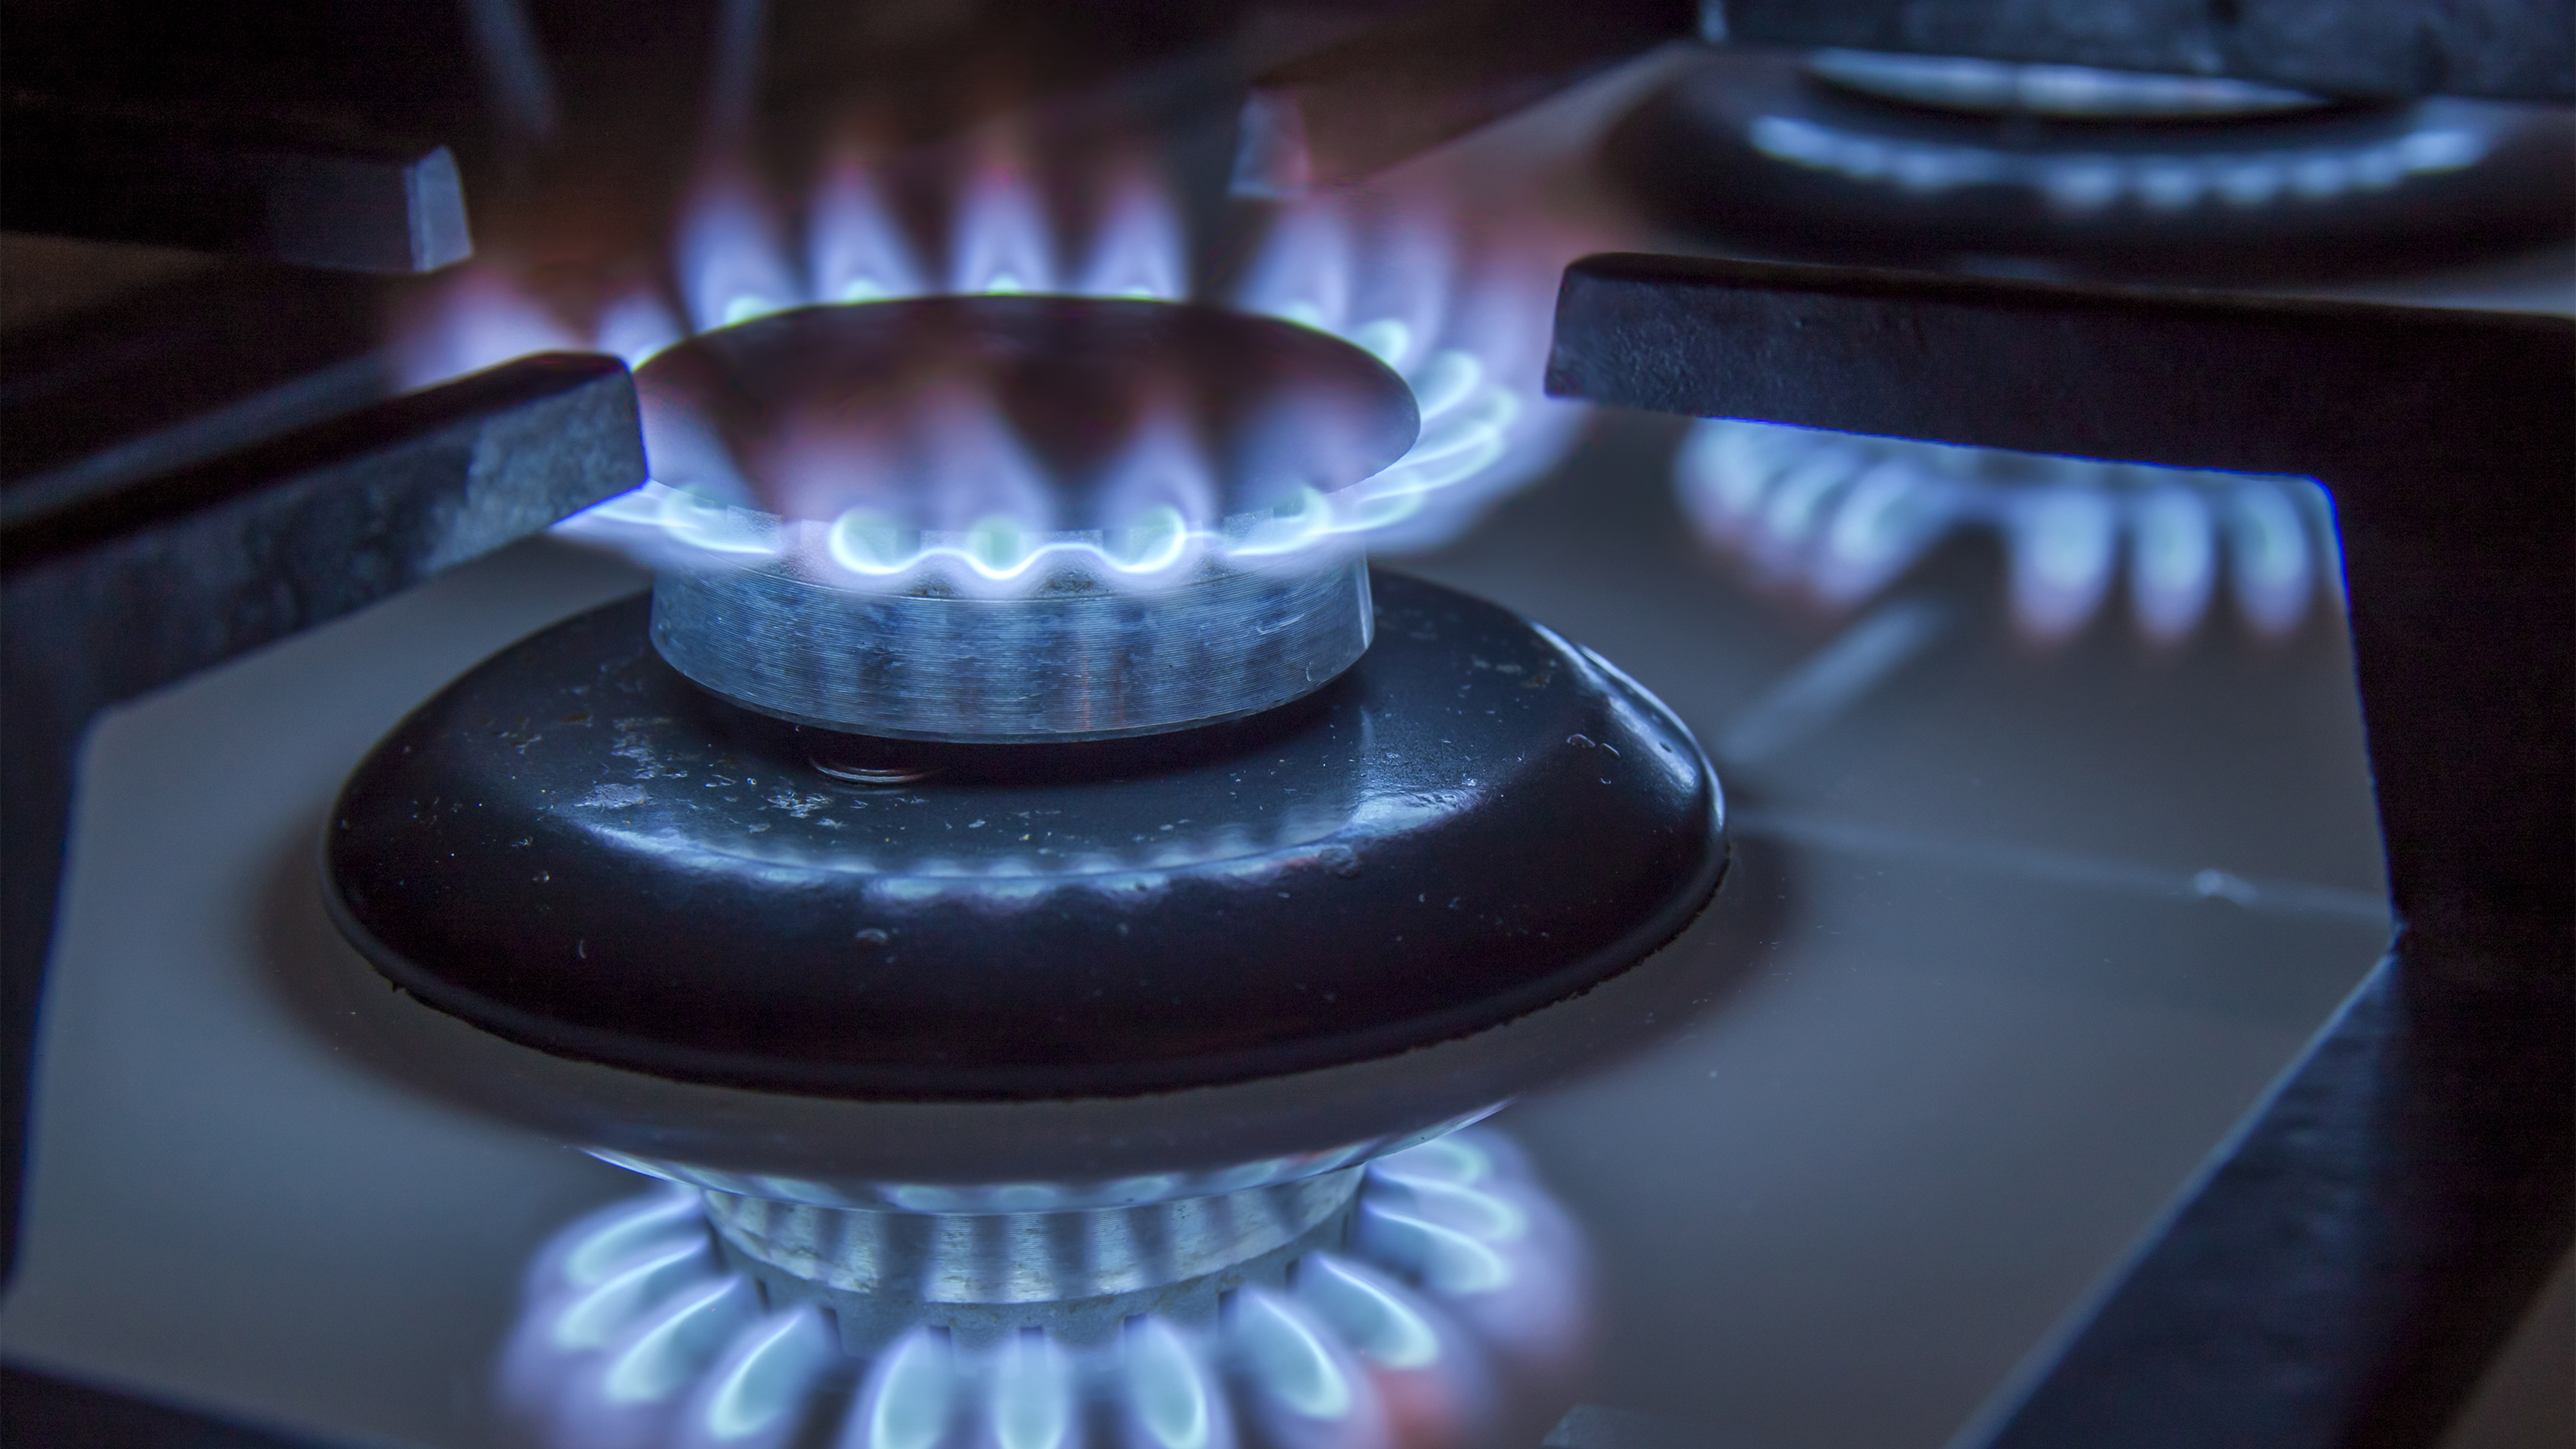 Burning gas stove hob blue flames close up in the dark on a black background; Shutterstock ID 541523737; purchase_order: N/A; job: PJ November 2022 Torill Bigg; client: ; other: 